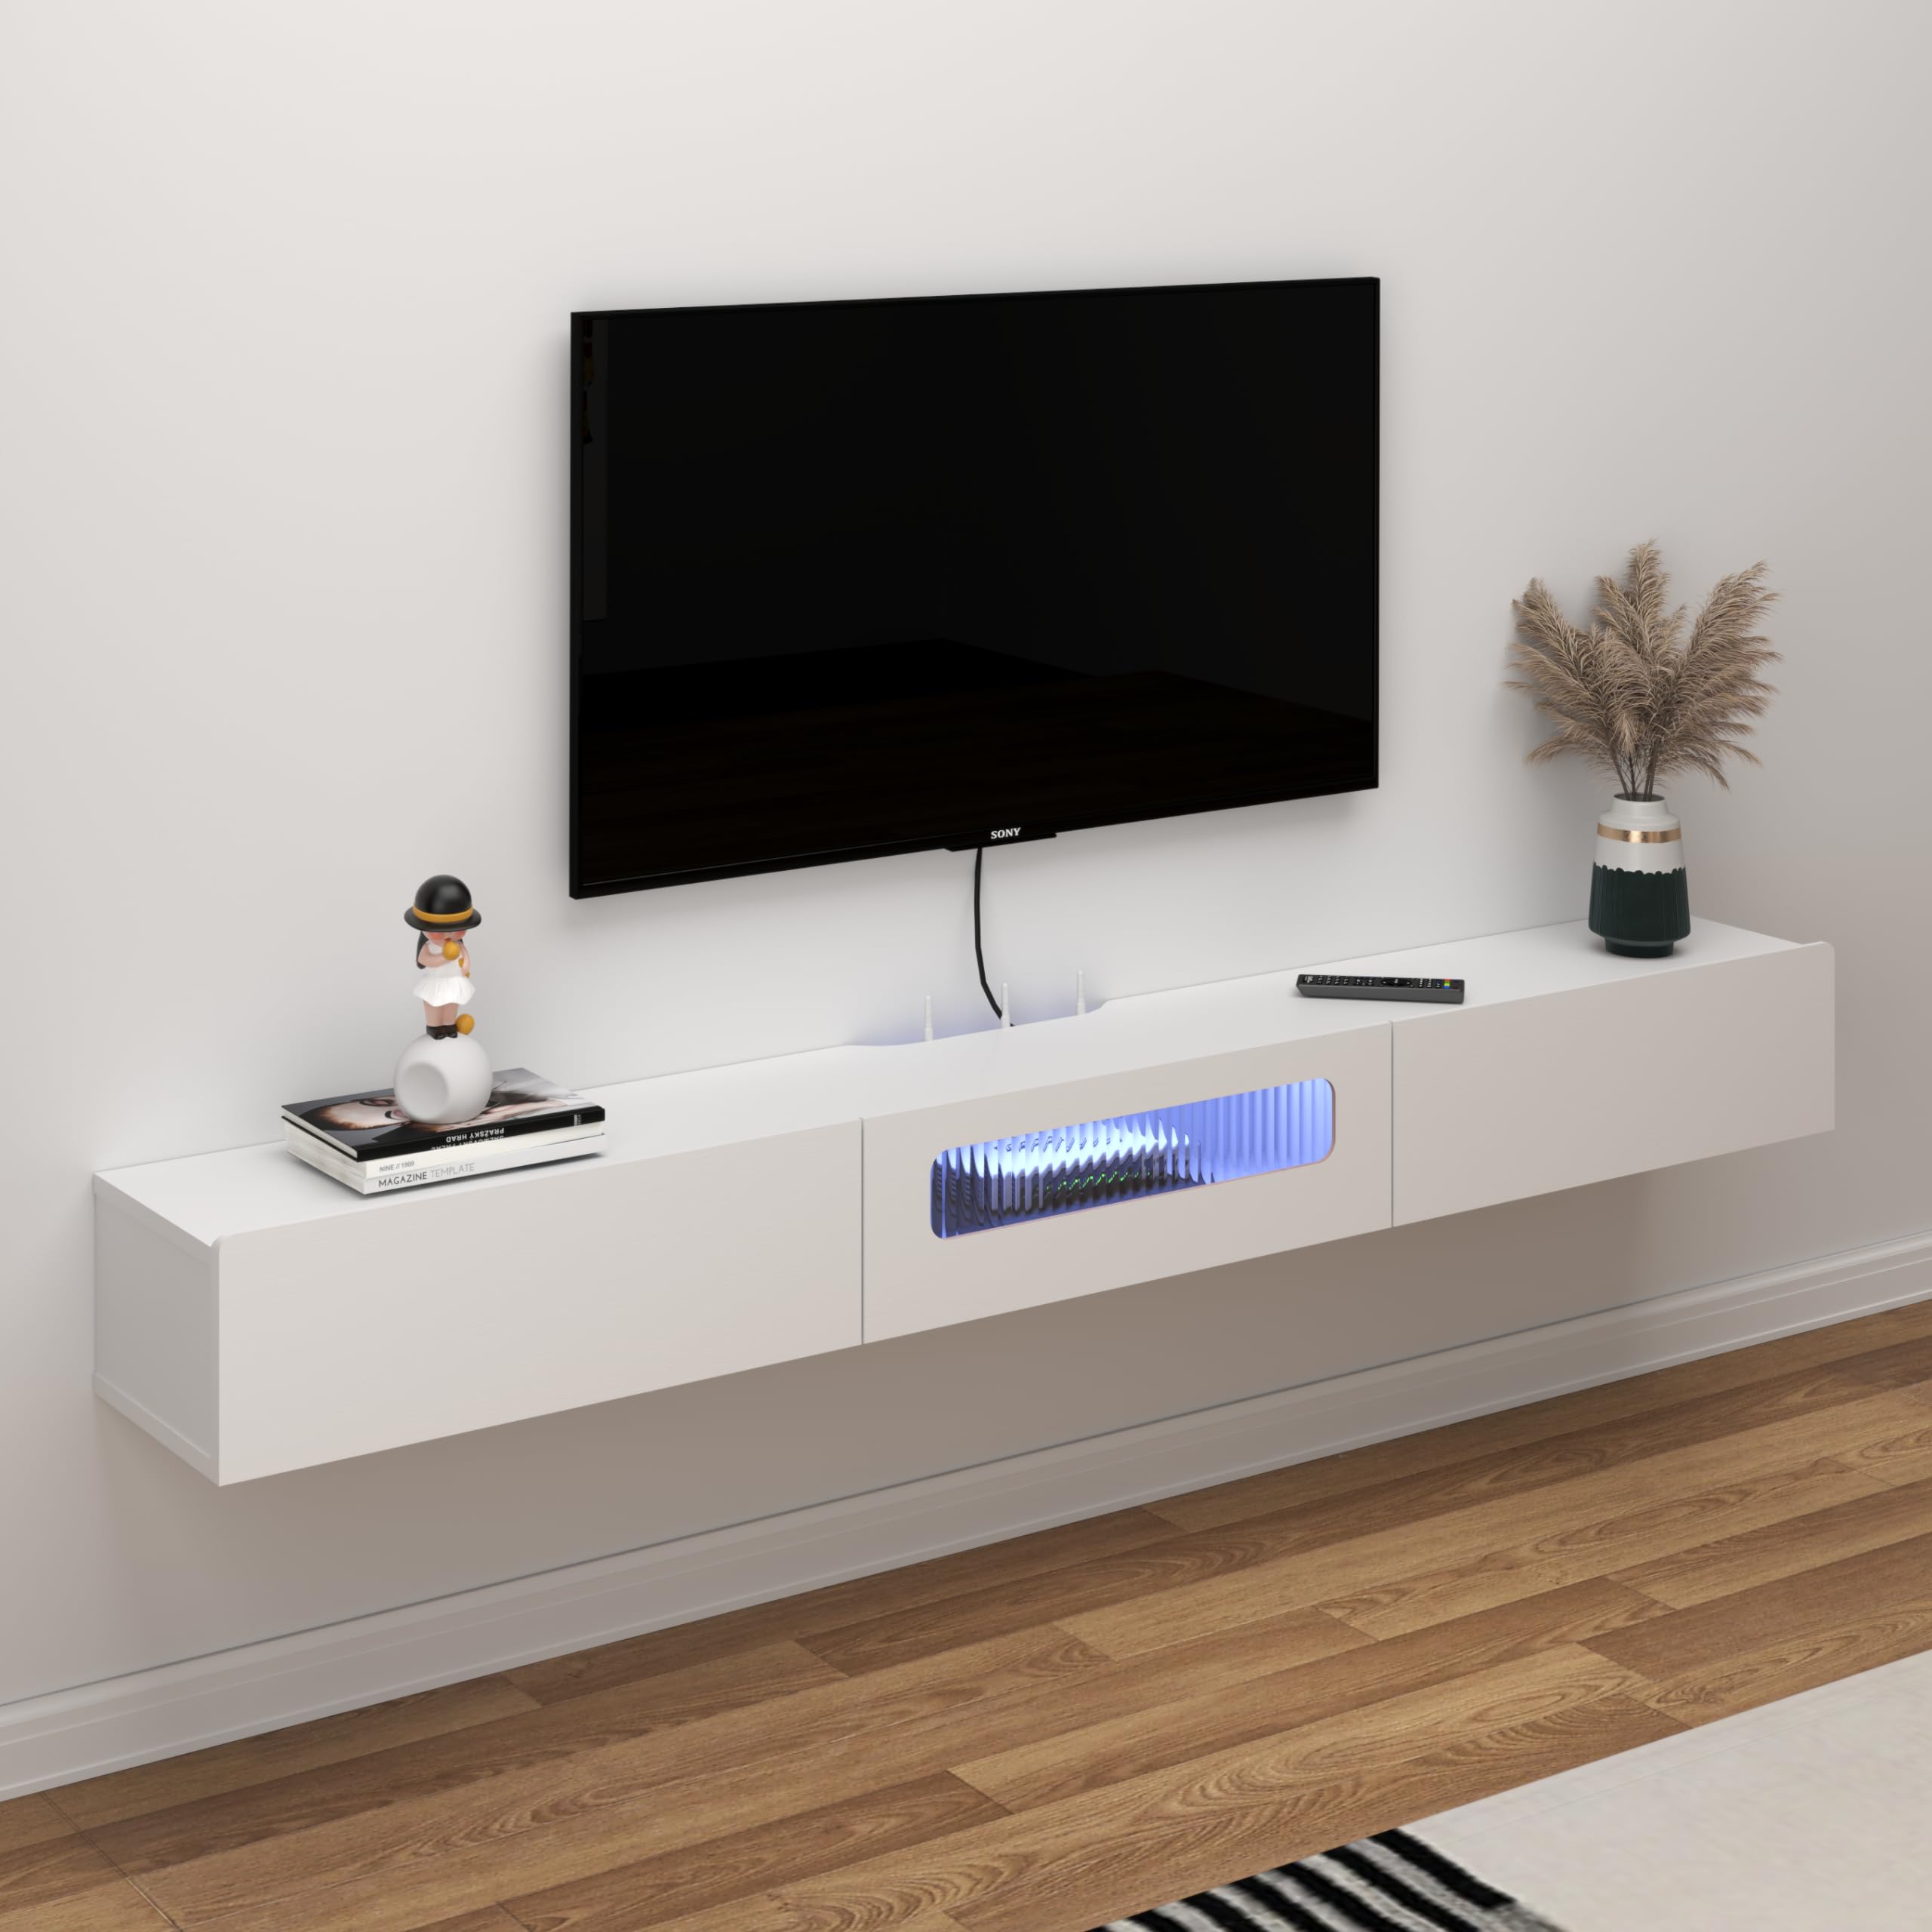 78.74" White Floating TV Stand Glass Door with LED Lights and Storage Drawers Media Console